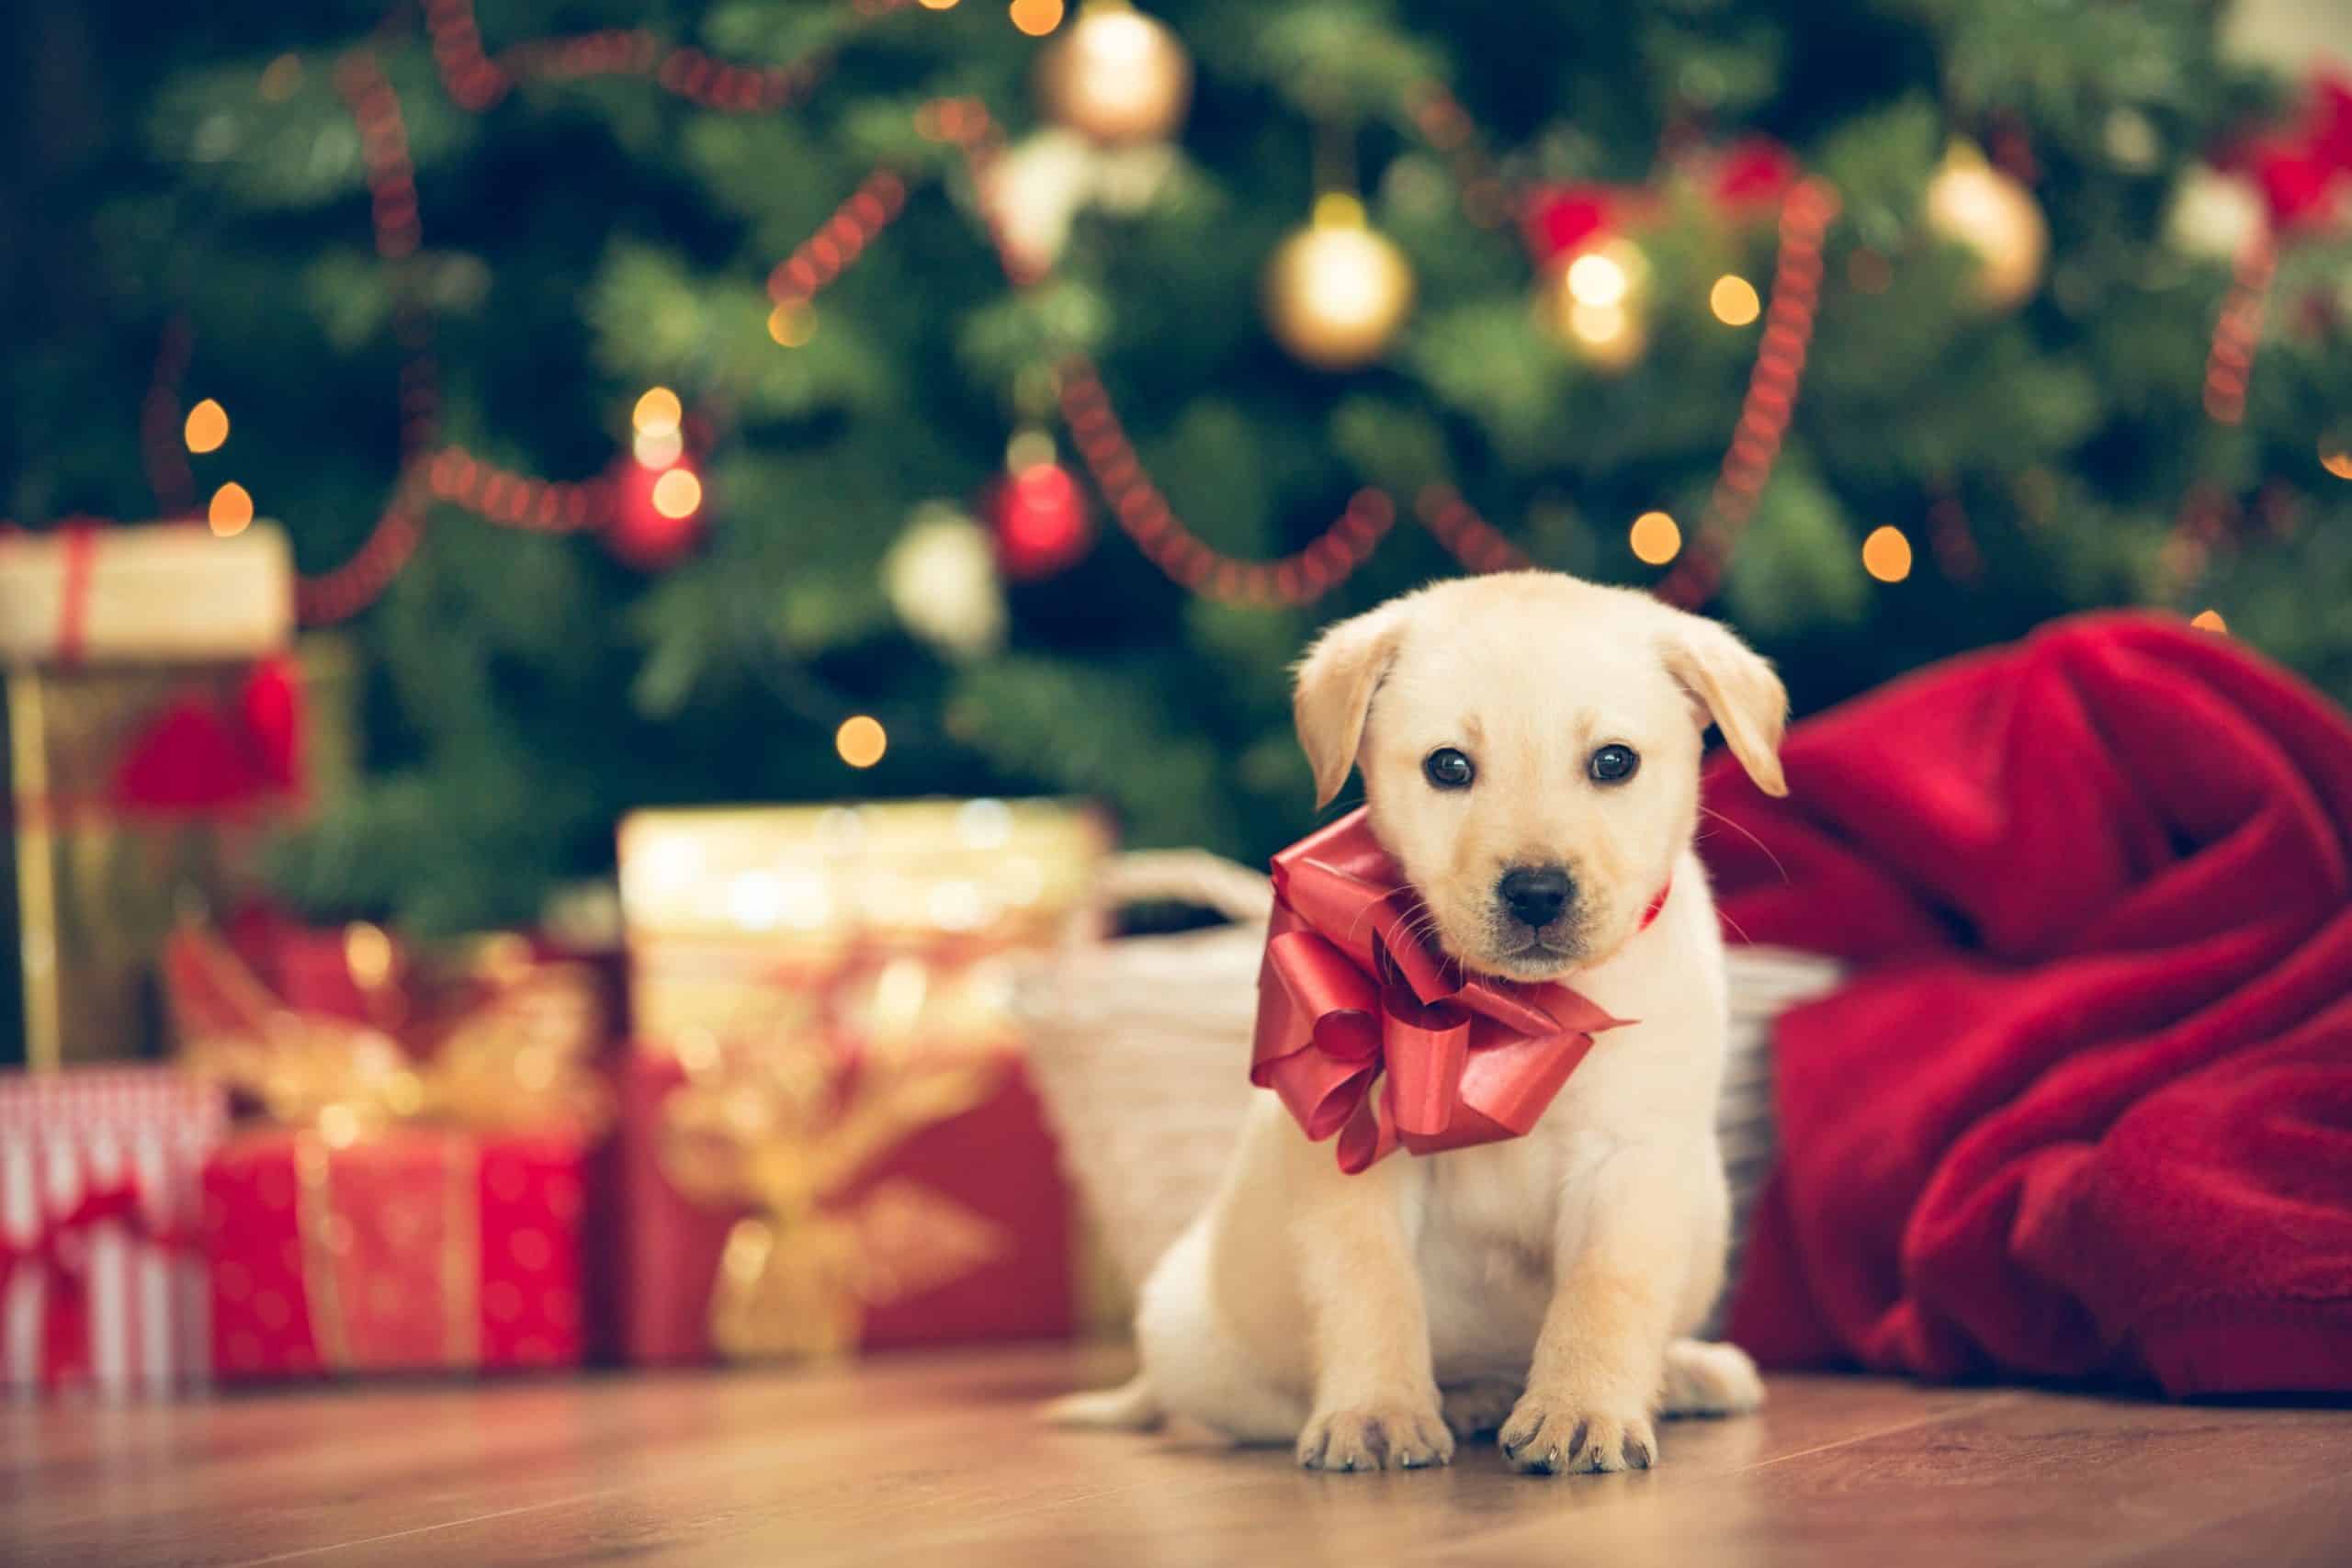 Bah Humbug: Why You Should Never Give a Pet as a Gift